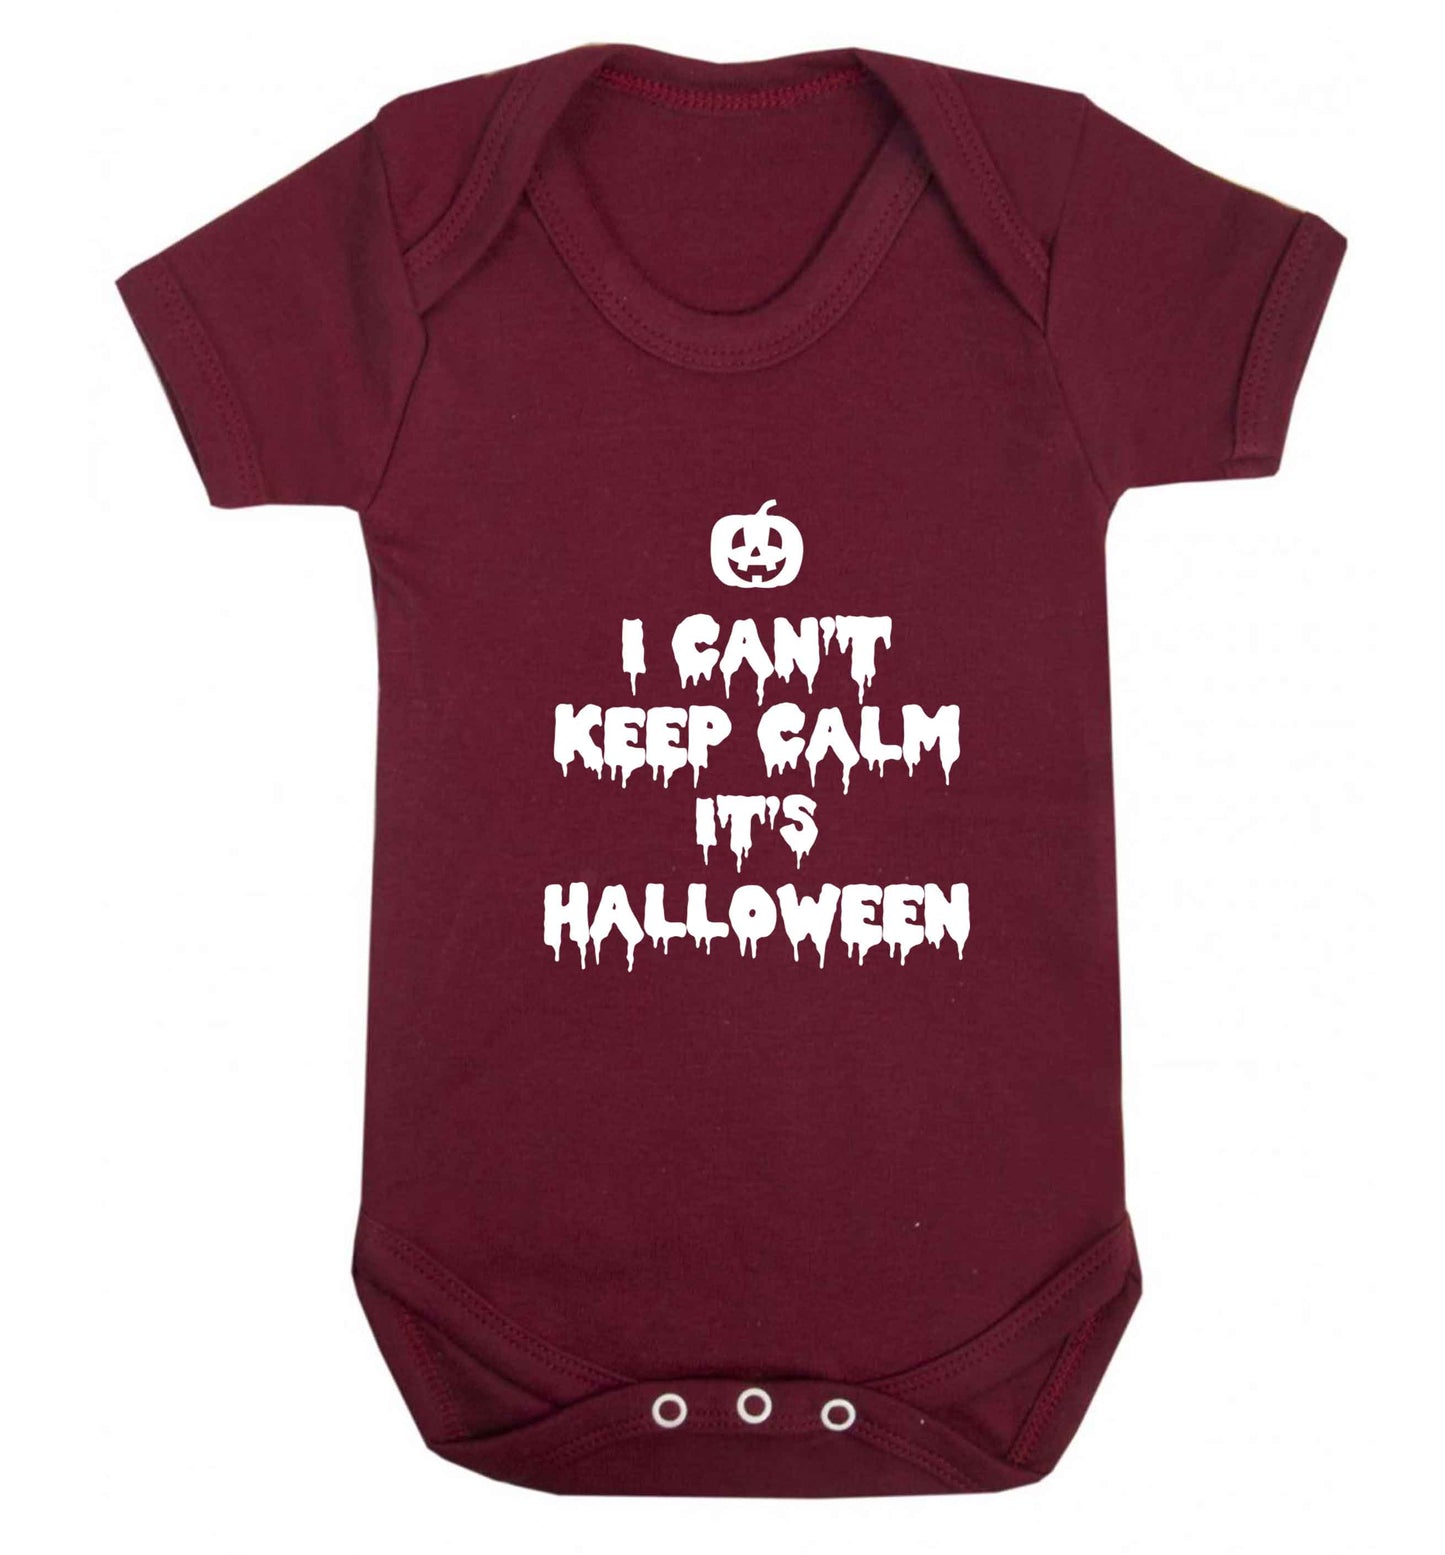 I can't keep calm it's halloween baby vest maroon 18-24 months